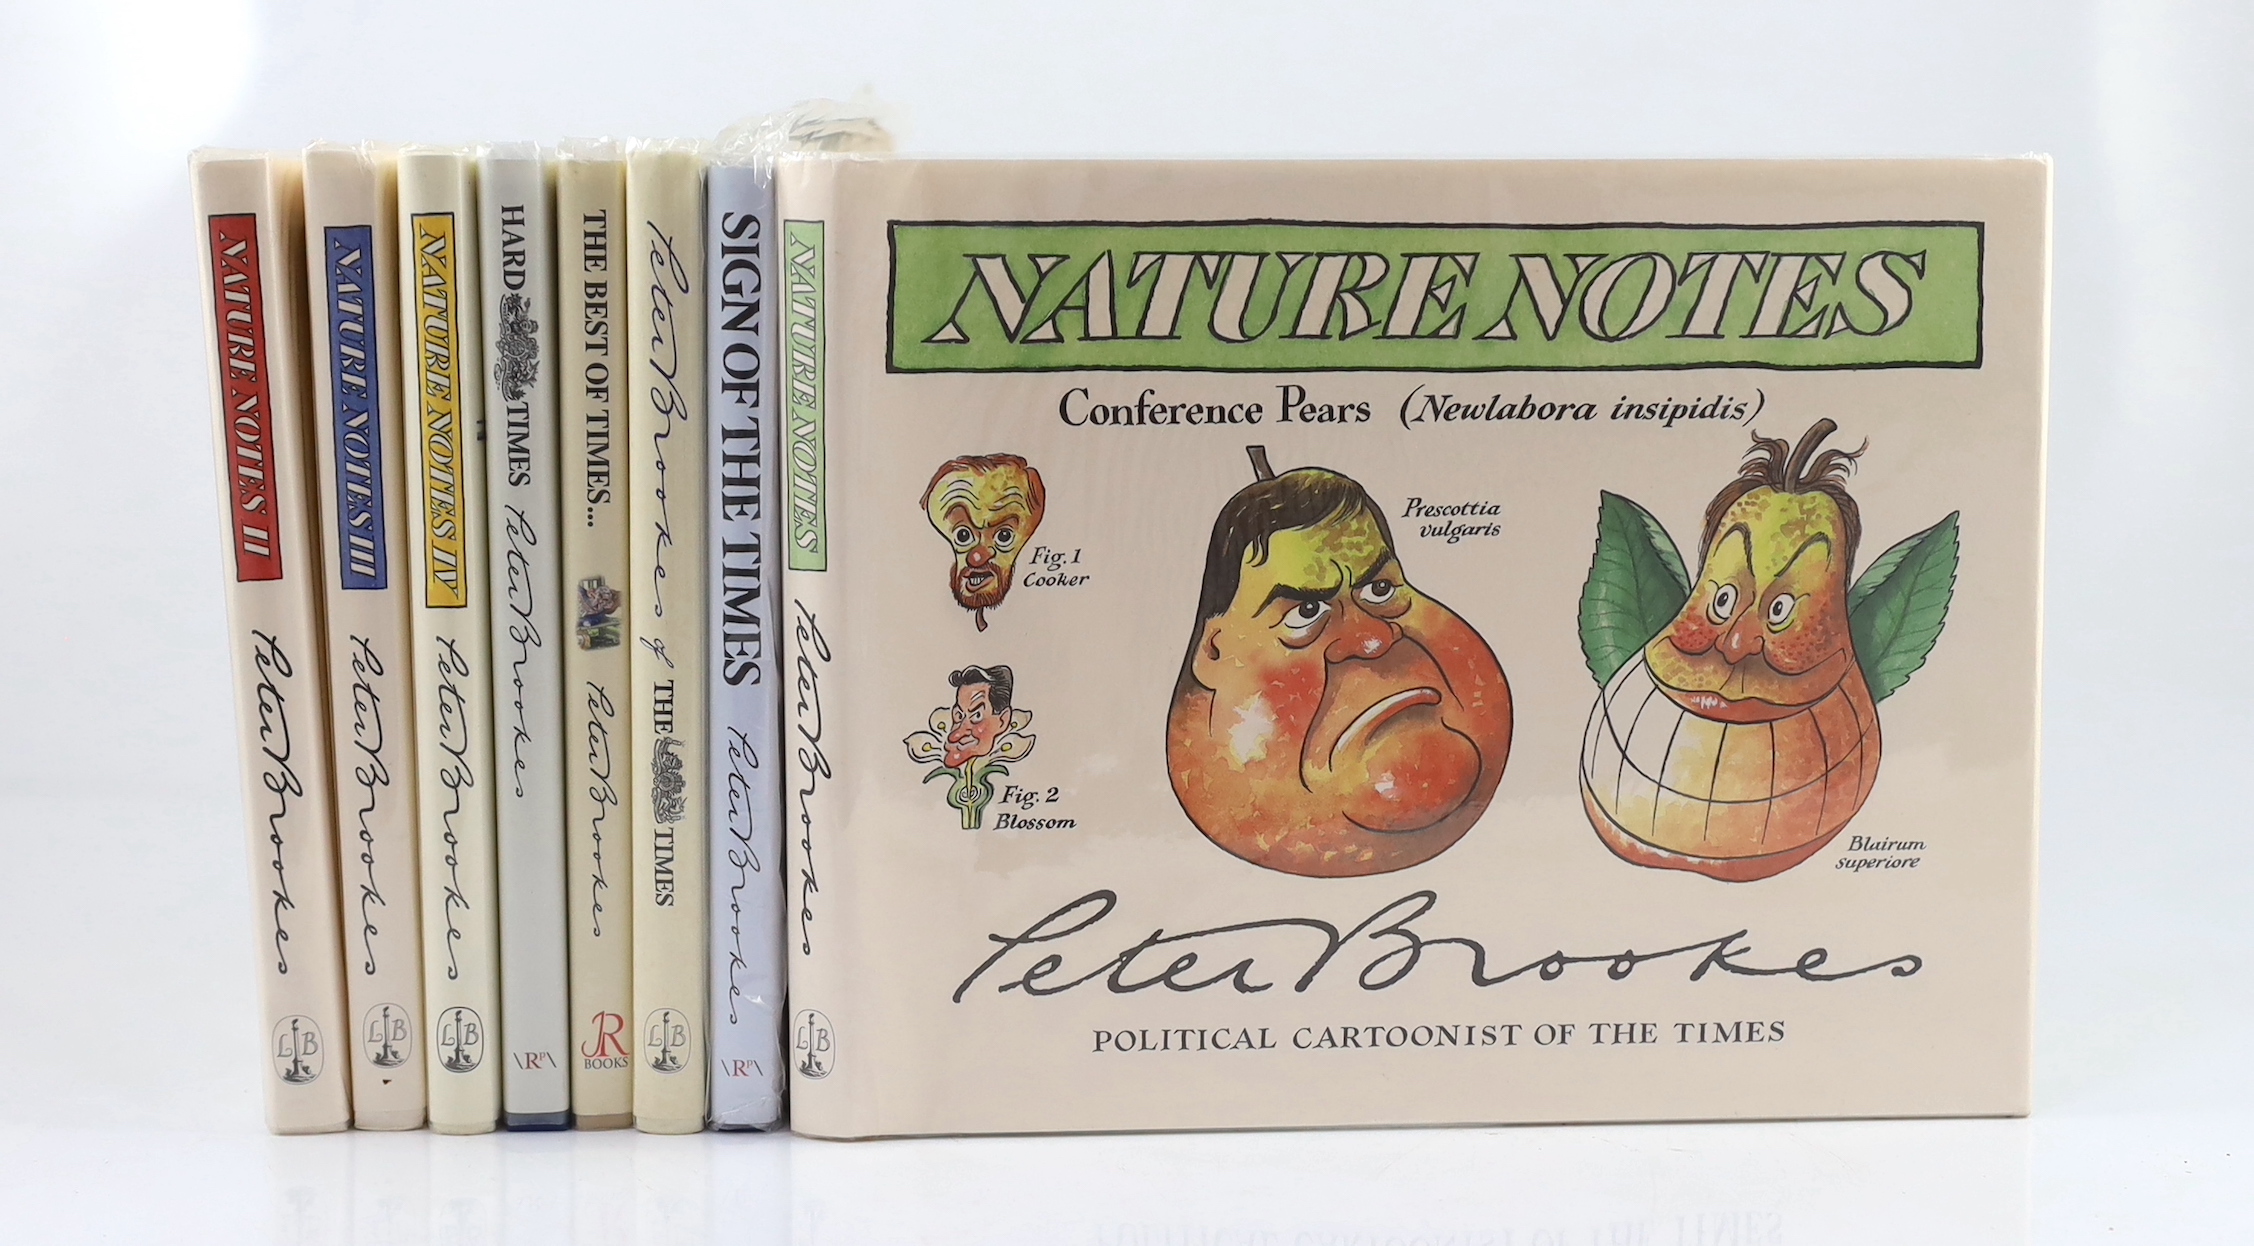 Brookes, Peter. Nature Notes. 1997; Nature Notes. The New Collection. 1999; Nature Notes III. 2001; Nature Notes IV. The Natural Selection. 2004. All signed by the author/artist. Together with four other “Times” cartoon